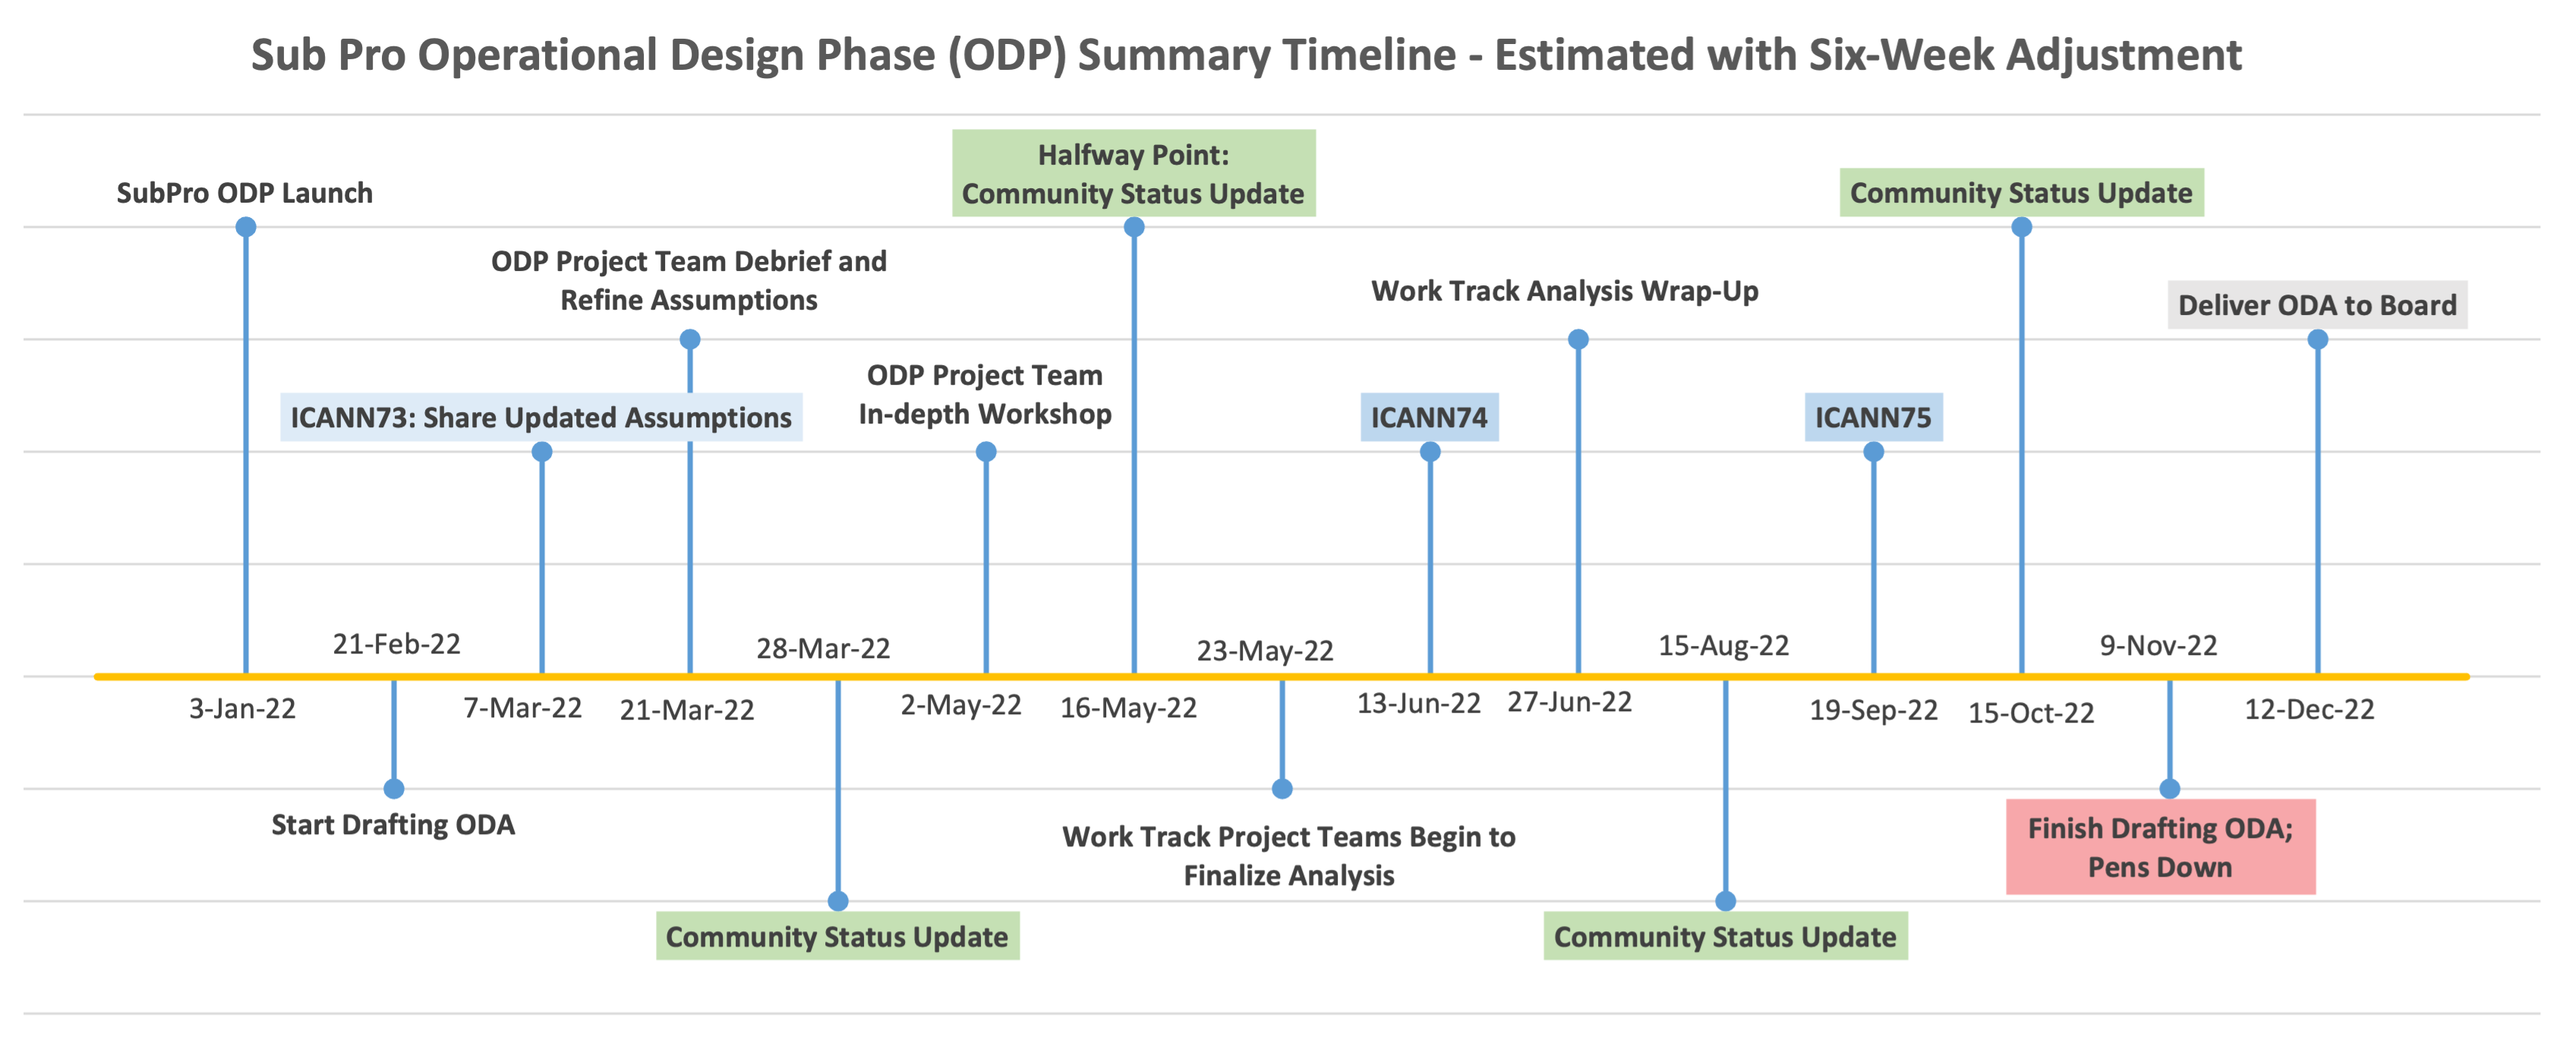 This summary timeline of the New gTLD Subsequent Procedures Operational Design Phase is an estimate based on a 6-week adjustment from the previous timeline. The timeline includes key milestones including internal ICANN team deliverables, community status updates, and upcoming ICANN public meetings, with the delivery of the Operational Design Assessment (ODA) in December 2022.